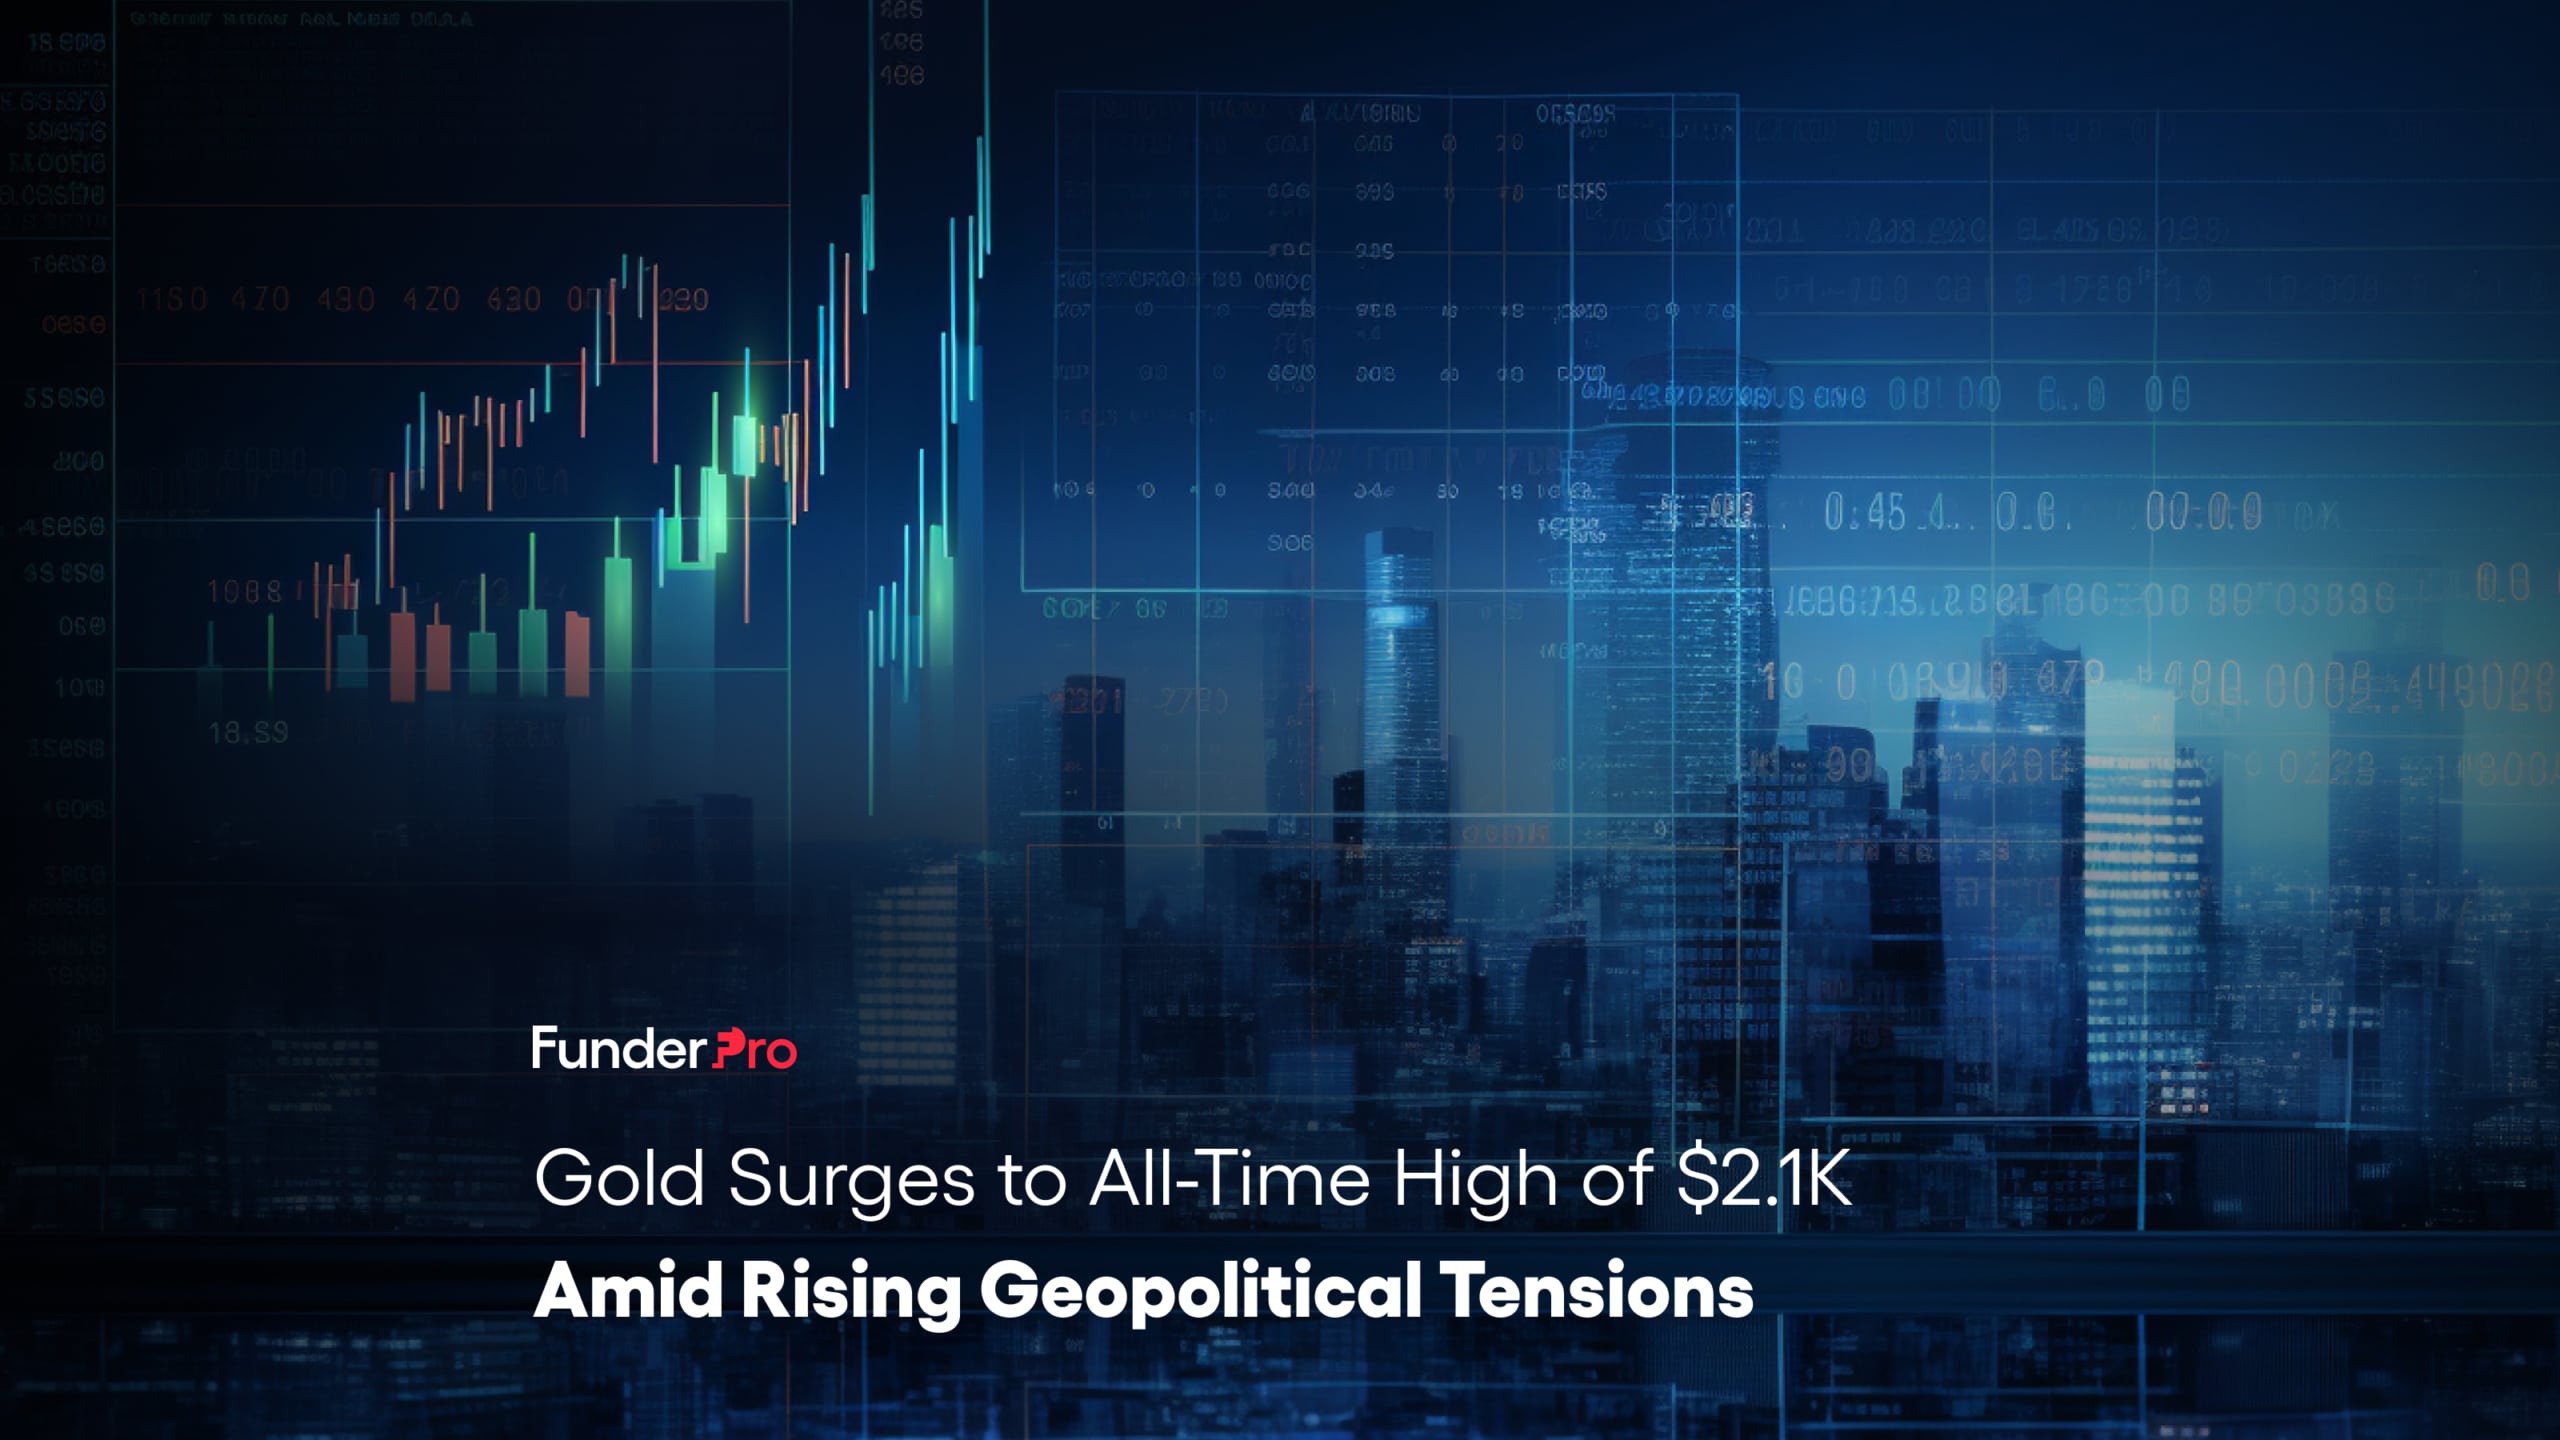 Gold Surges to All-Time High of $2.1K Amid Rising Geopolitical Tensions